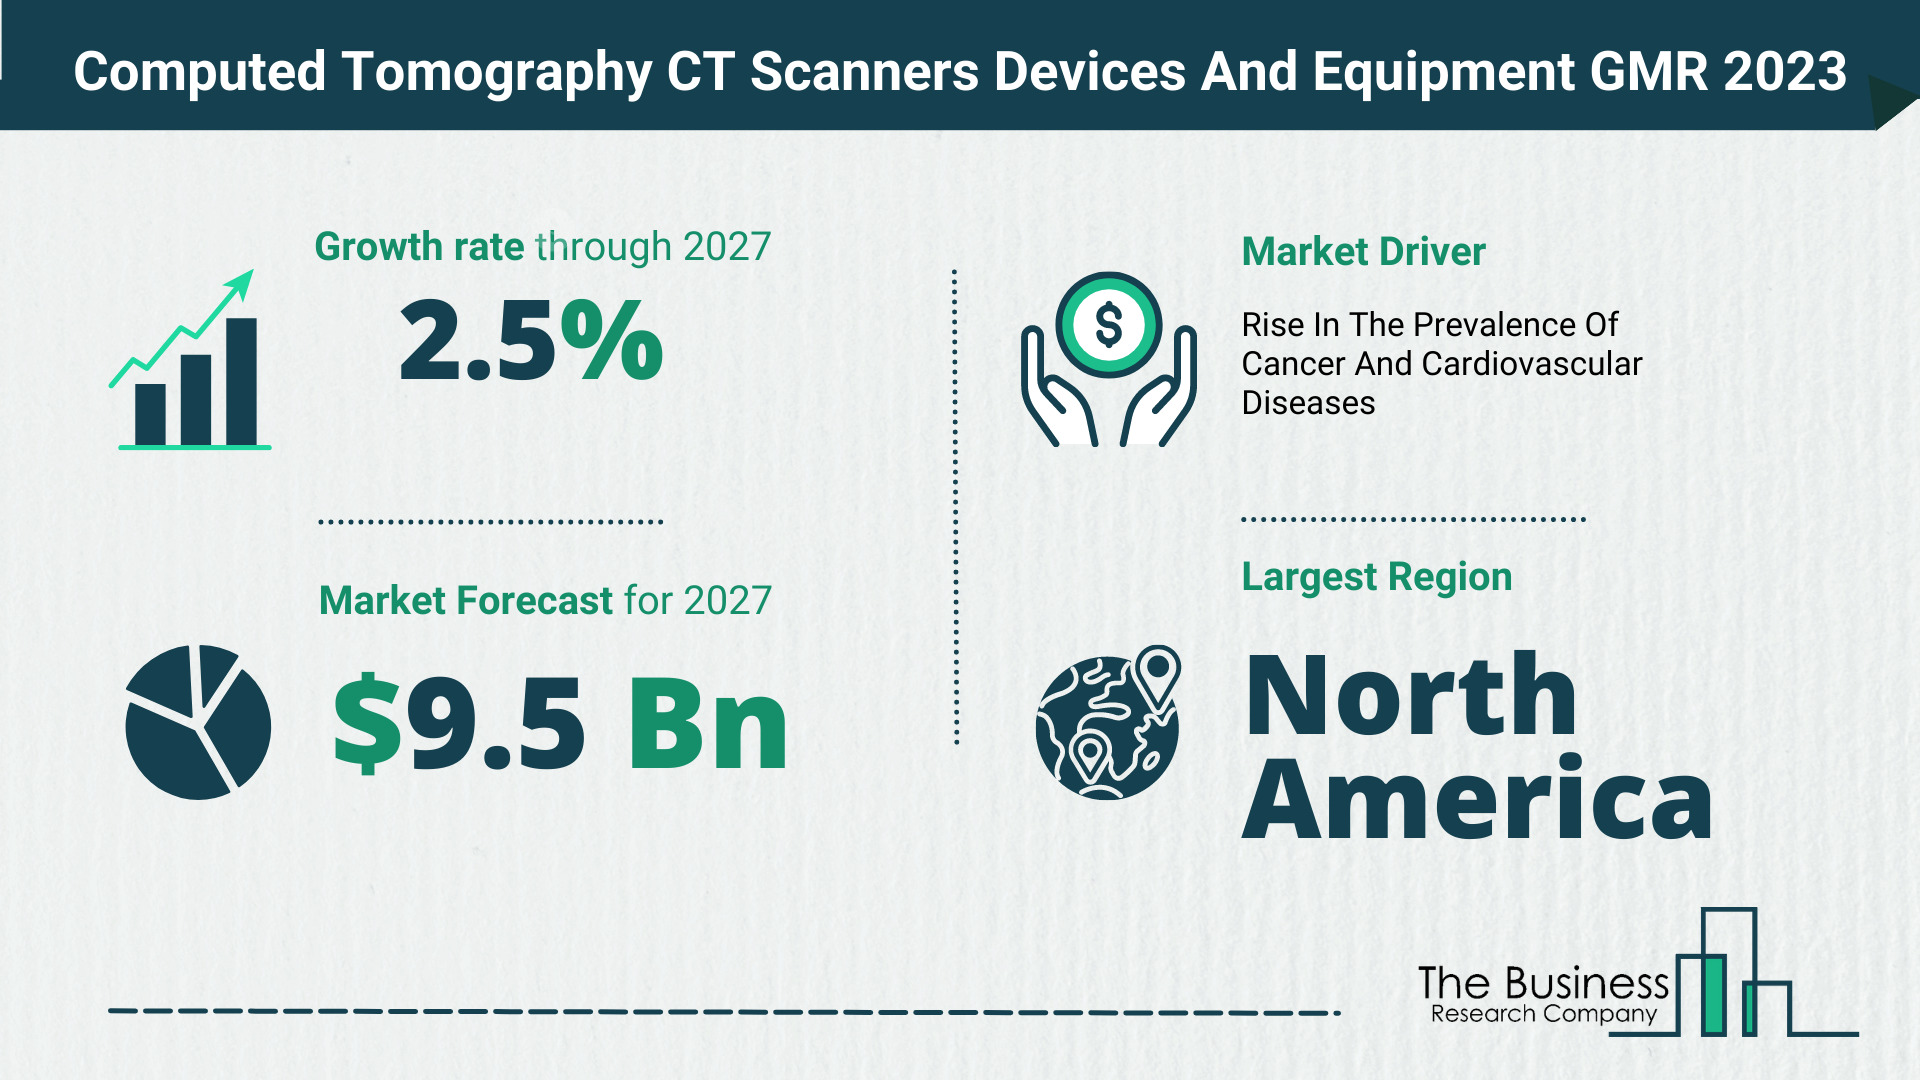 Comprehensive Computed Tomography CT Scanners Devices And Equipment Market Analysis, By The Business Research Company